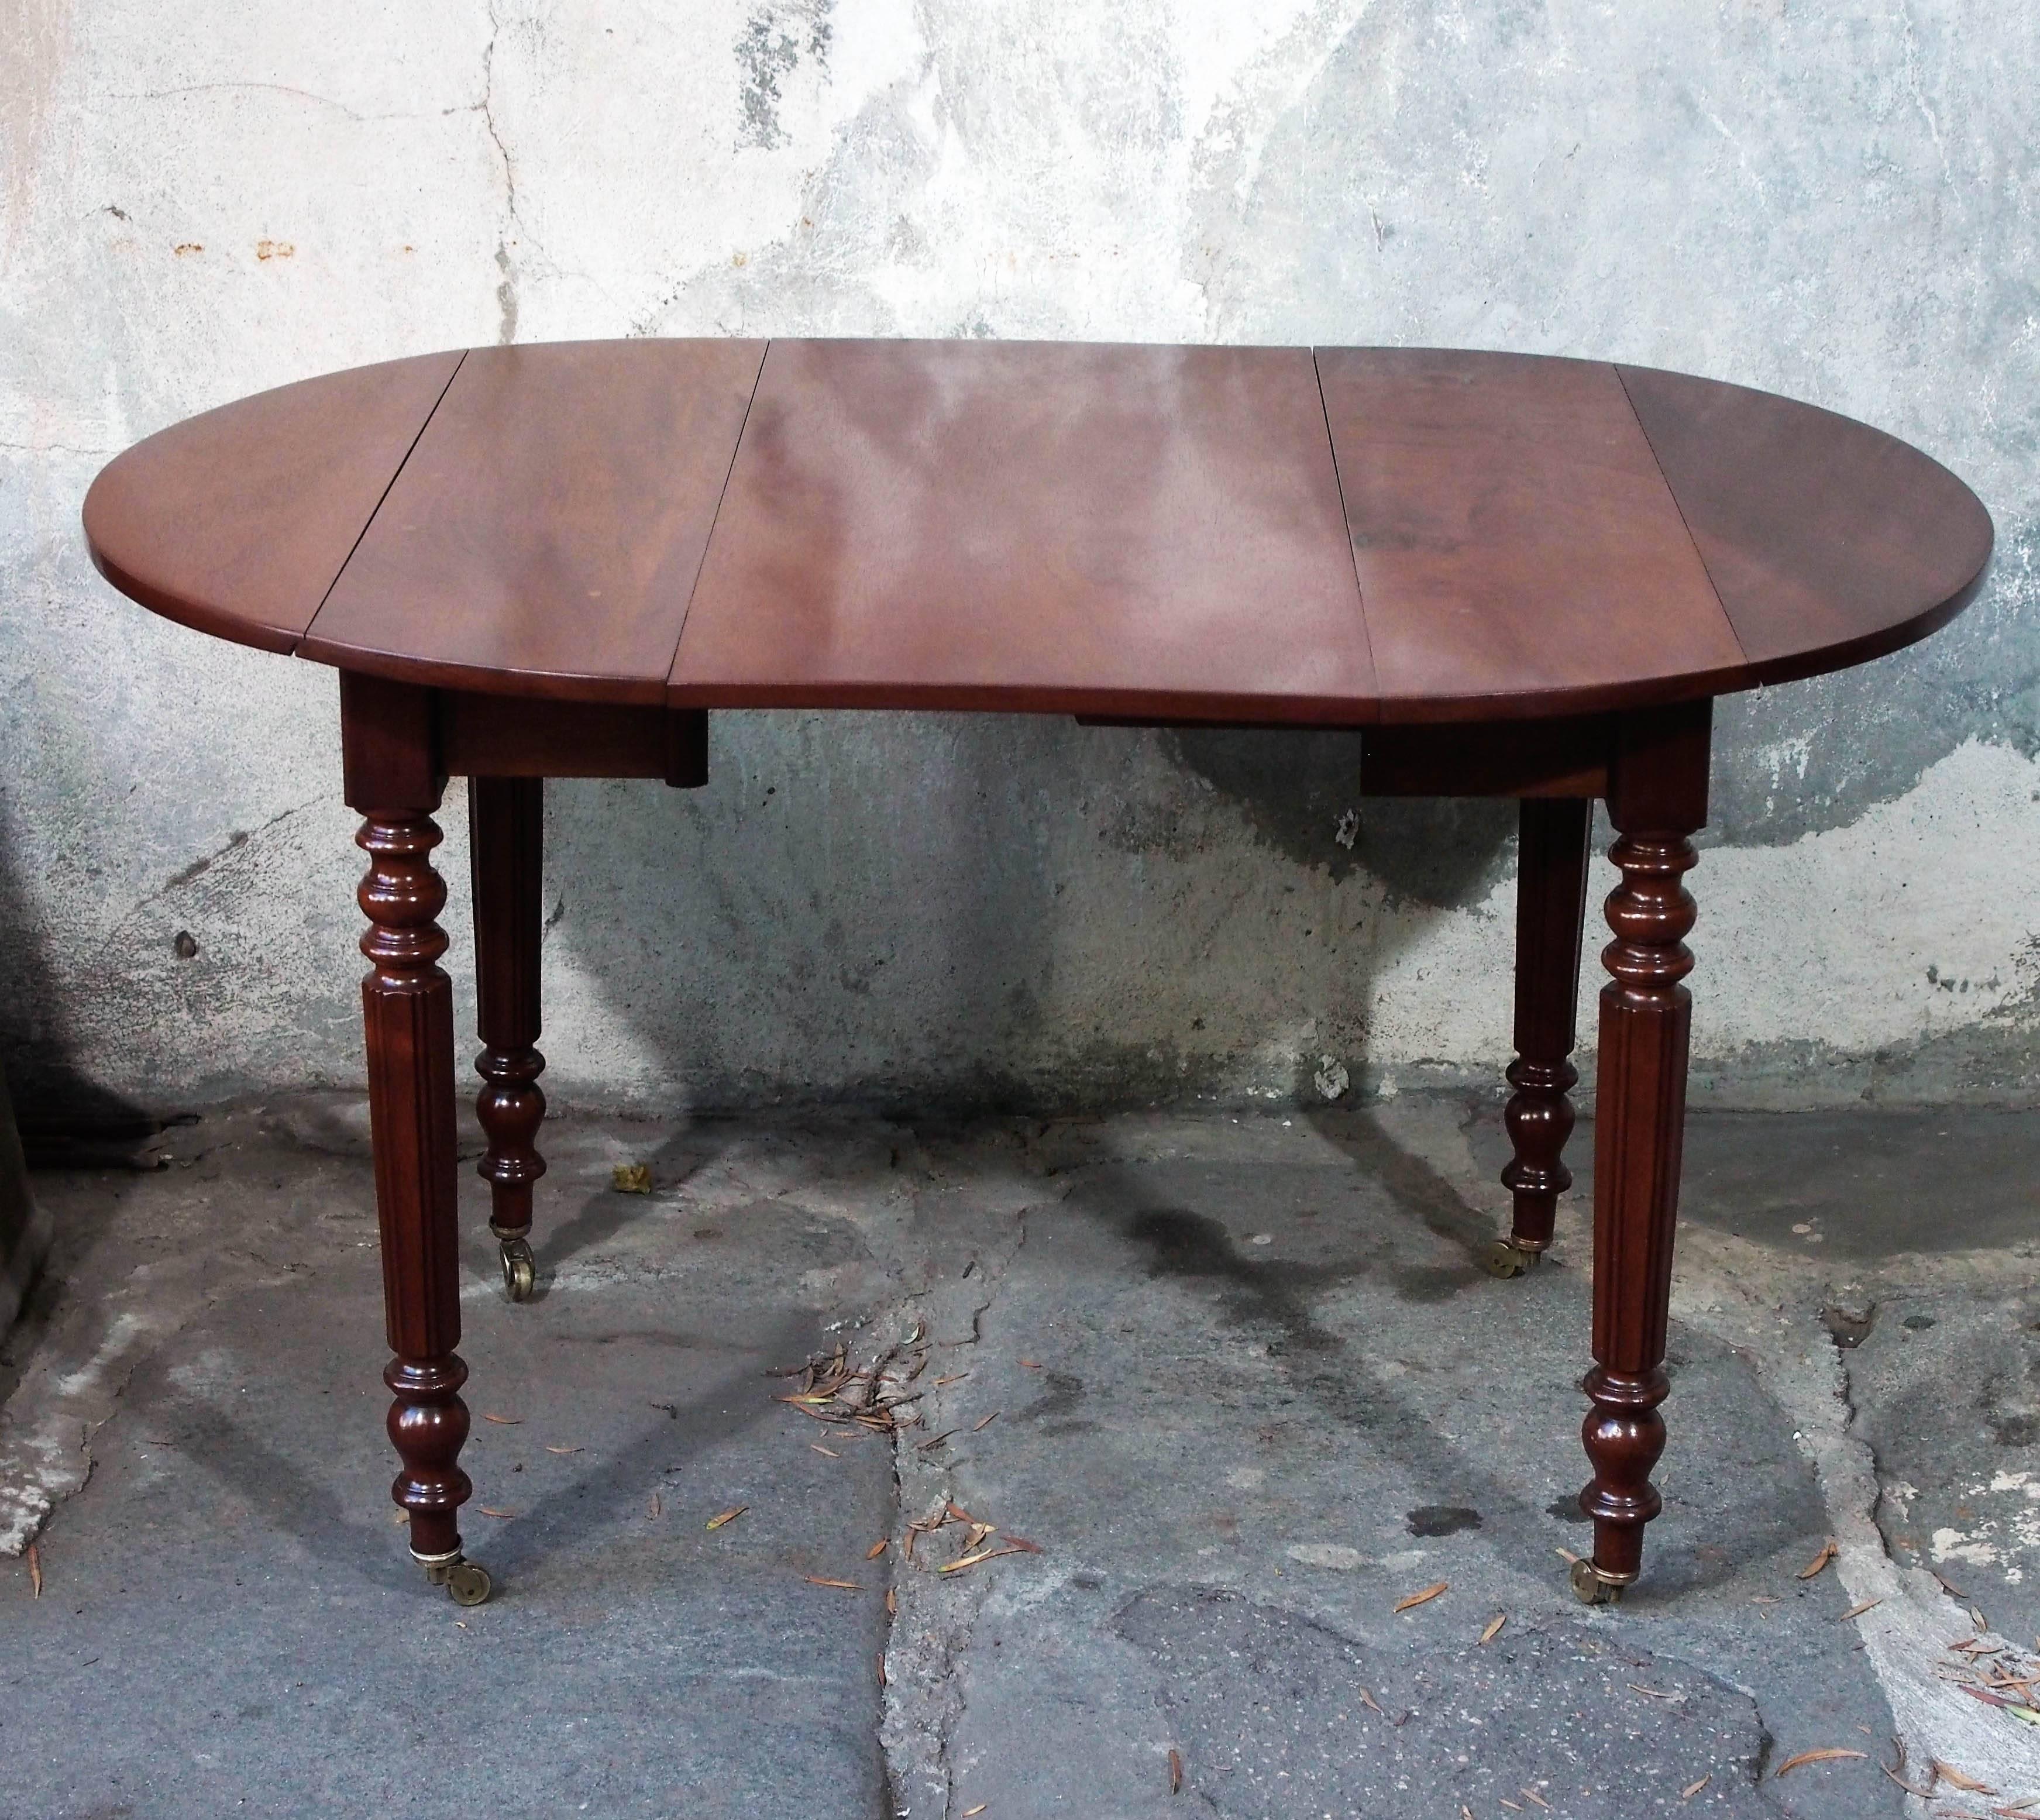 Charming early 19th century French walnut child's drop-leaf dining table with turned and fluted legs, with runner system and one additional leaf to expand size.